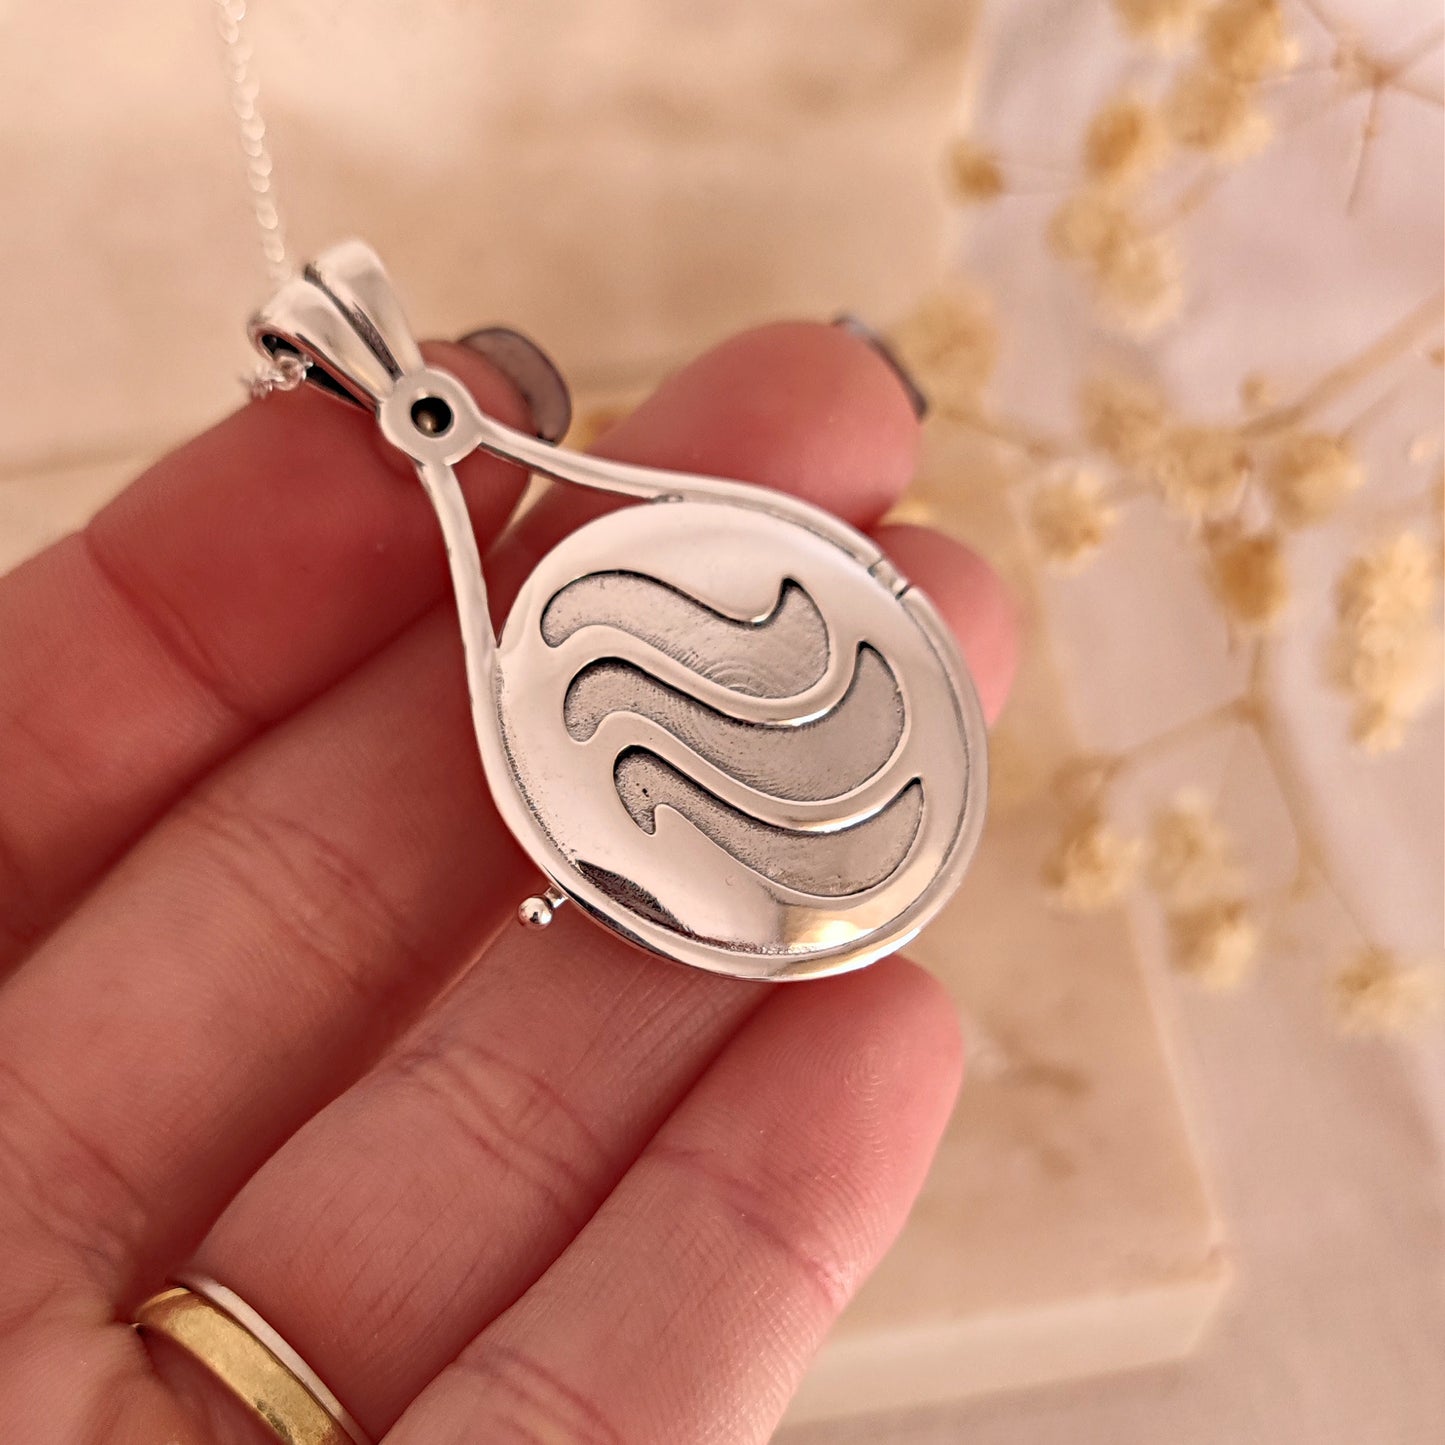 Handcrafted 925 Sterling Silver Mermaids Locket Necklace